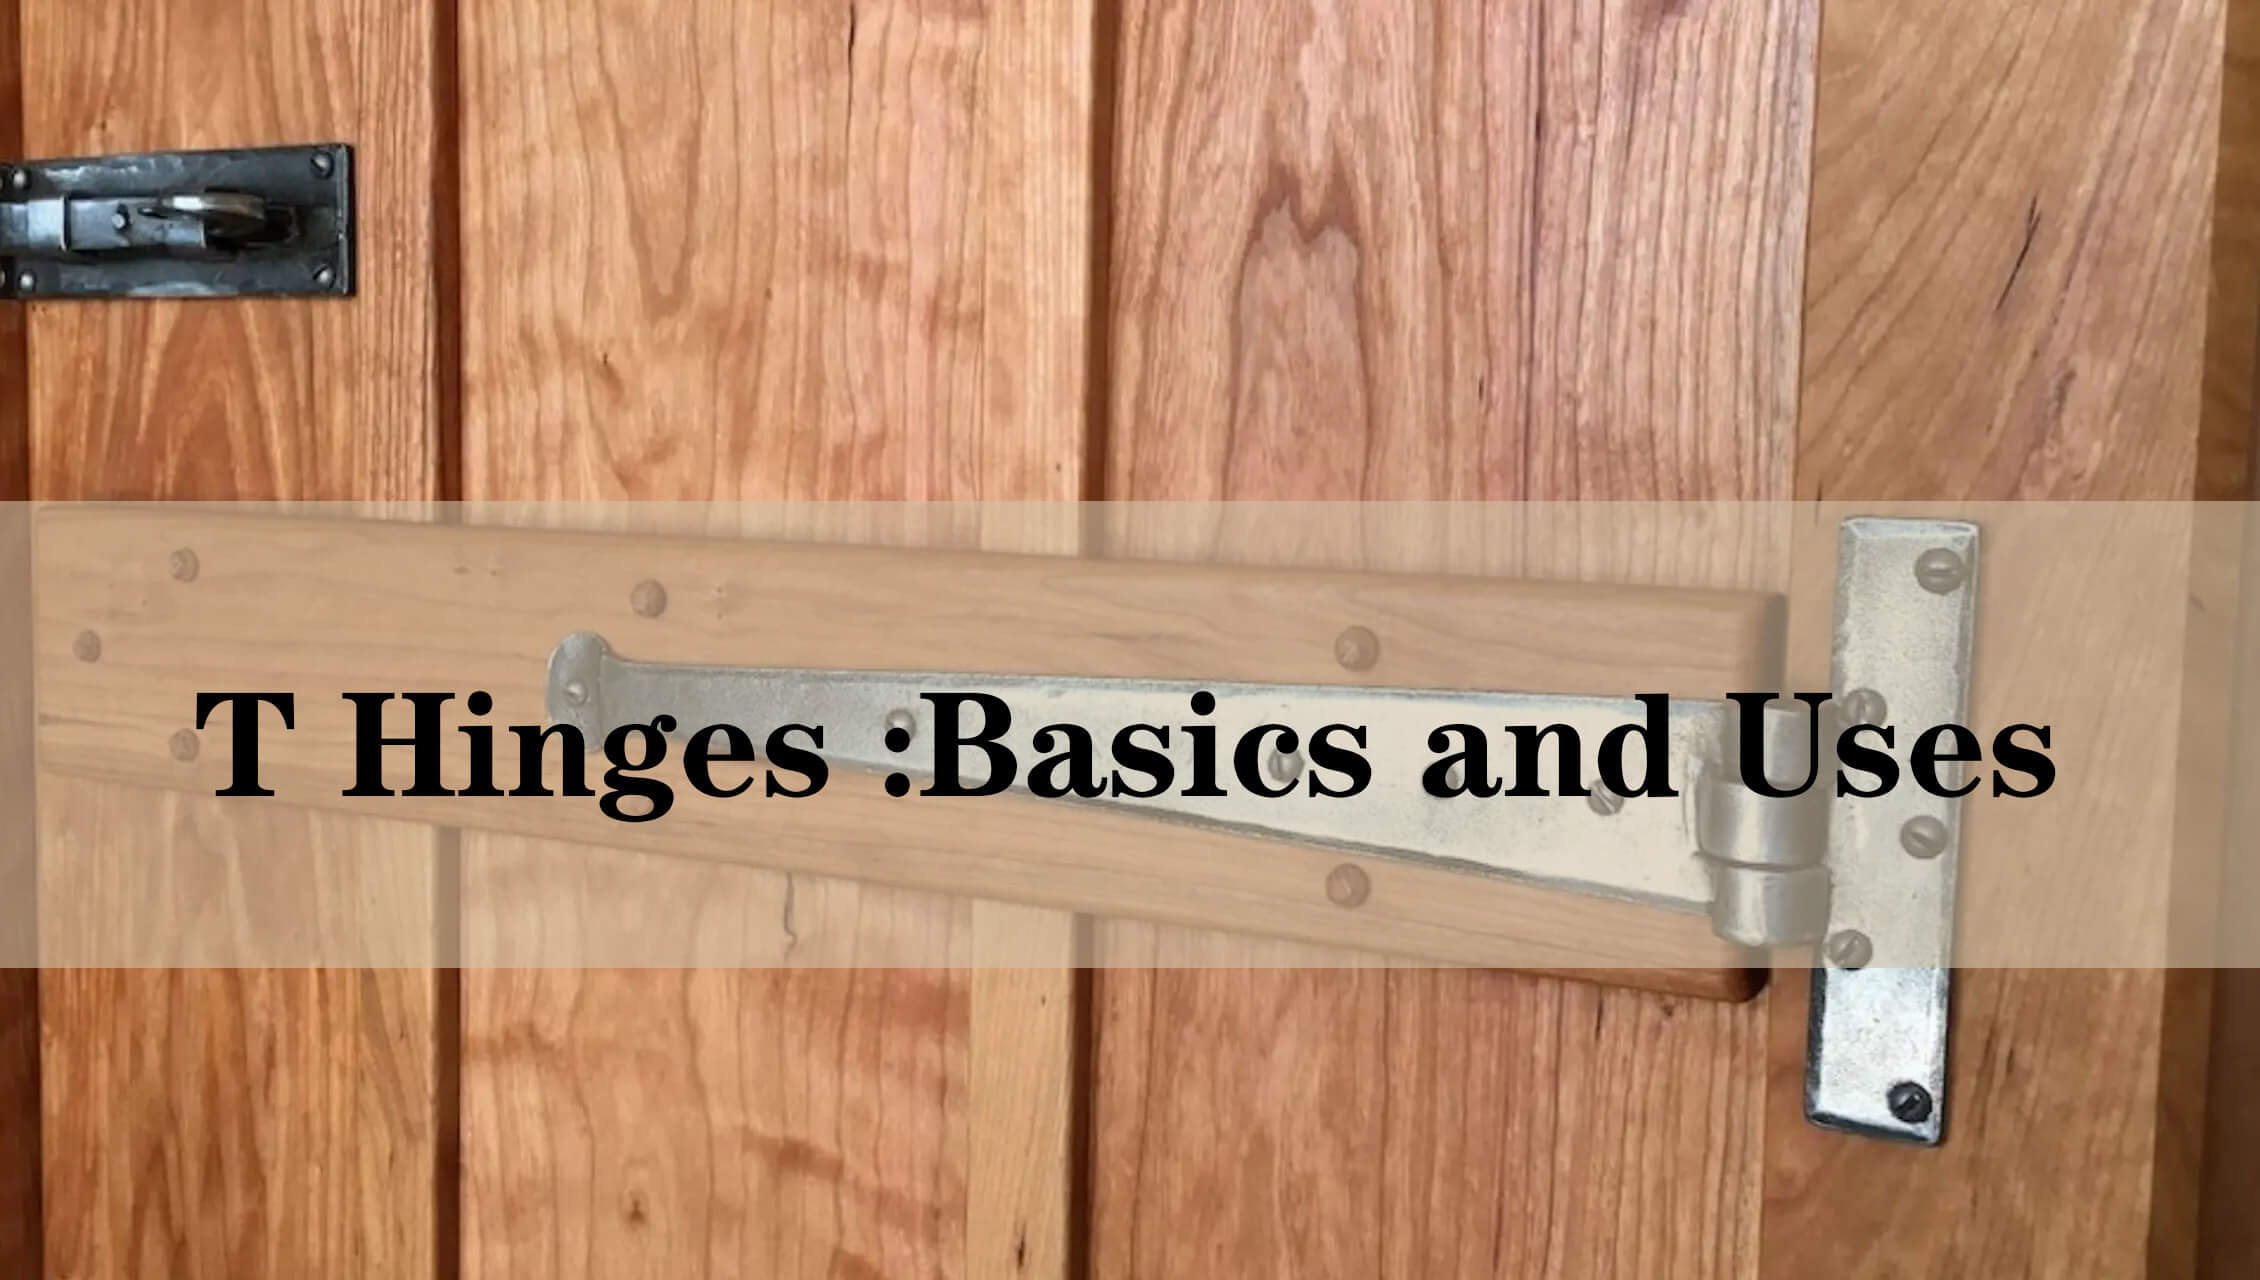 Understanding T Hinges: Basics and Uses